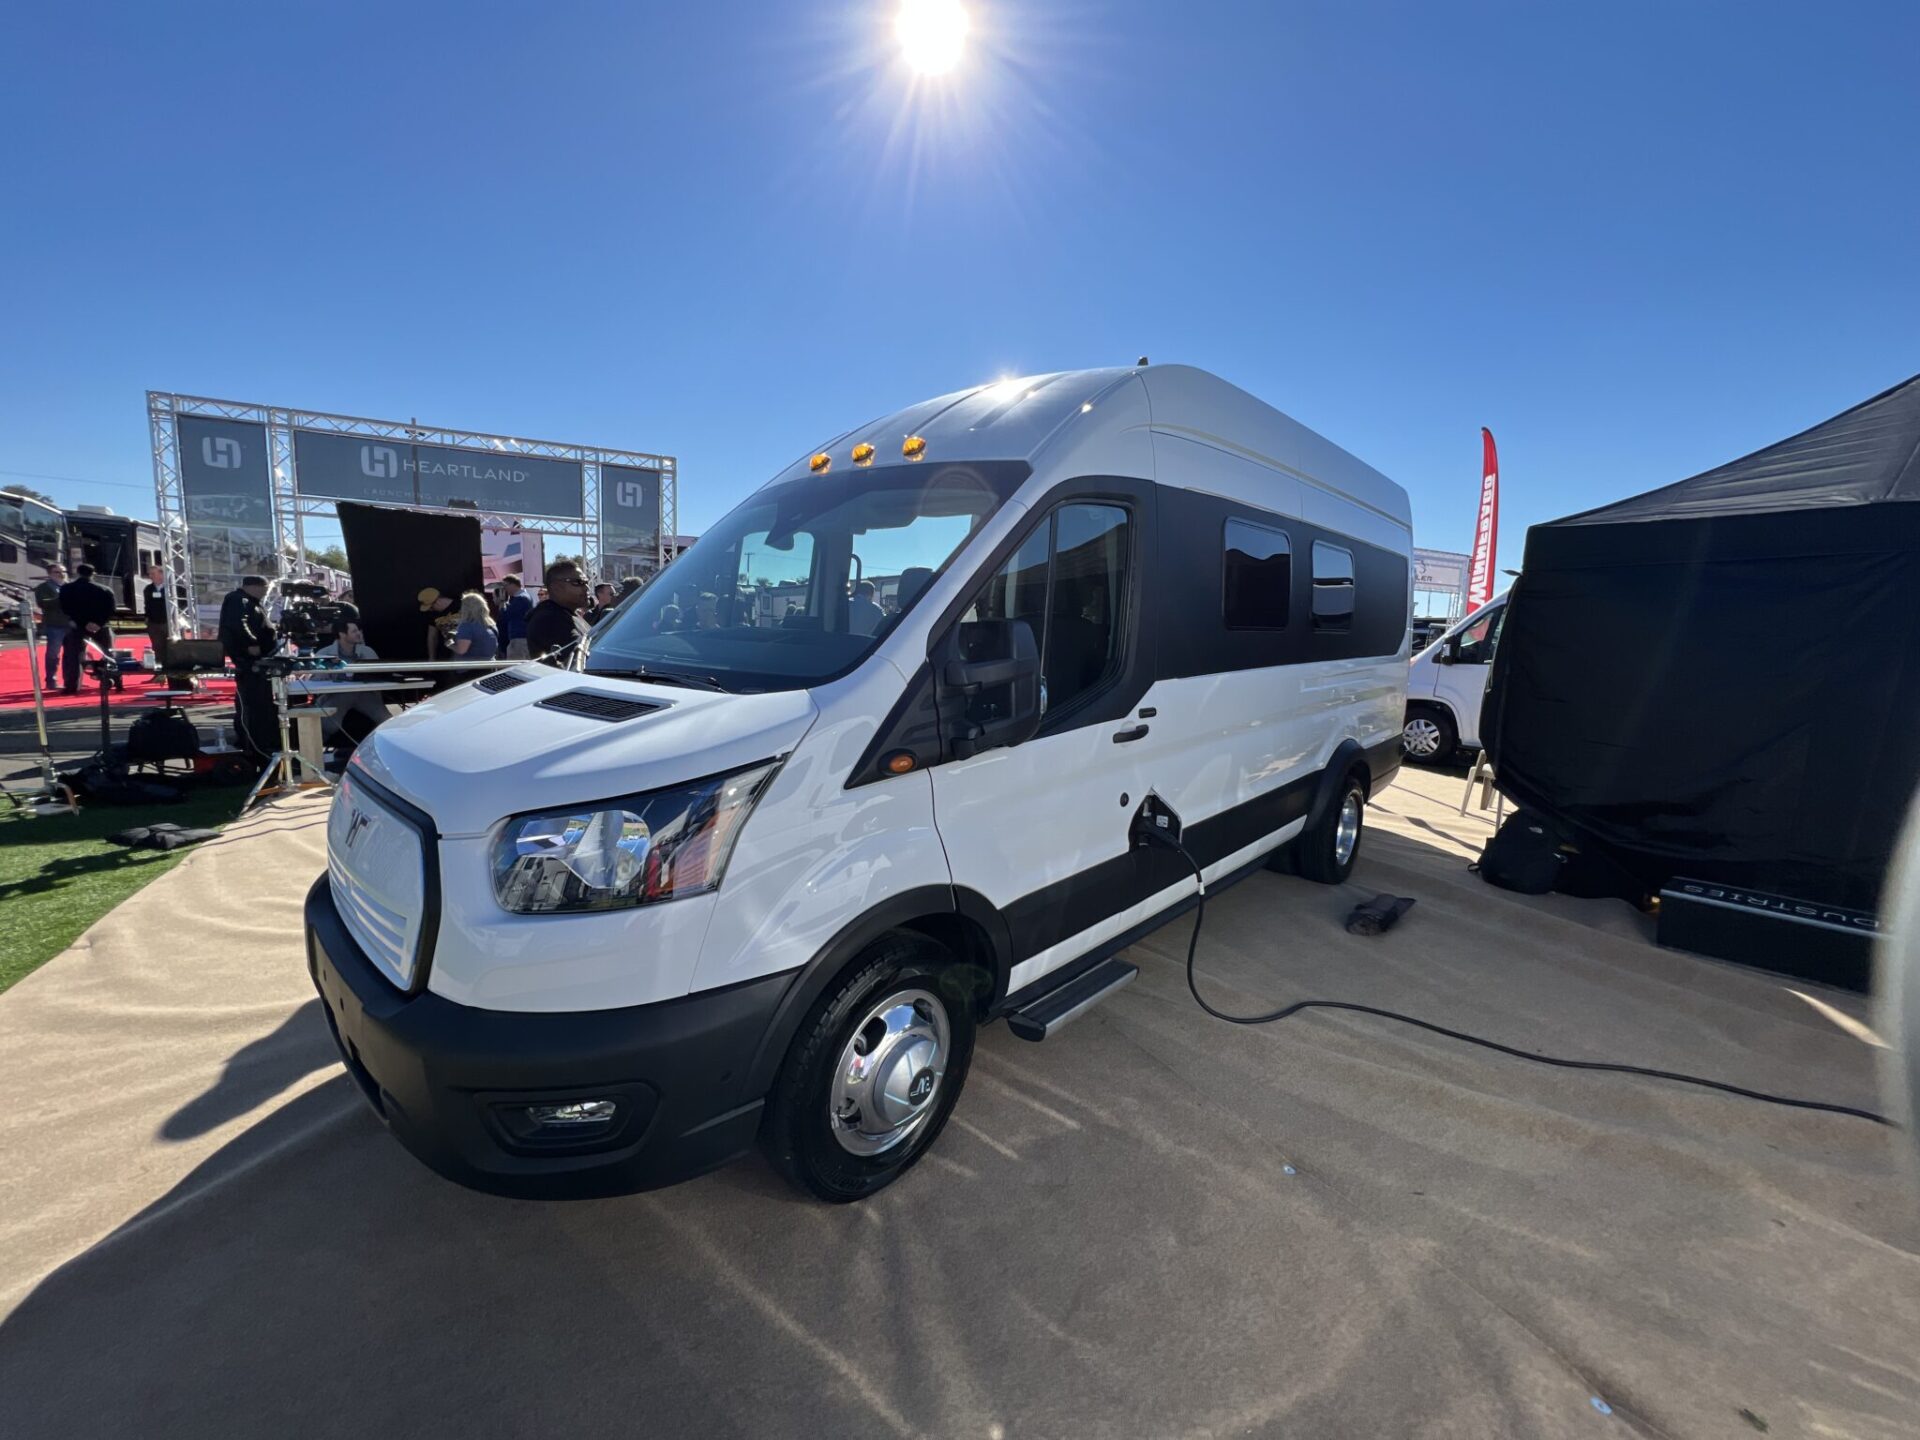 Winnebago Reveals All-Electric Motorhome Concept at Florida RV SuperShow